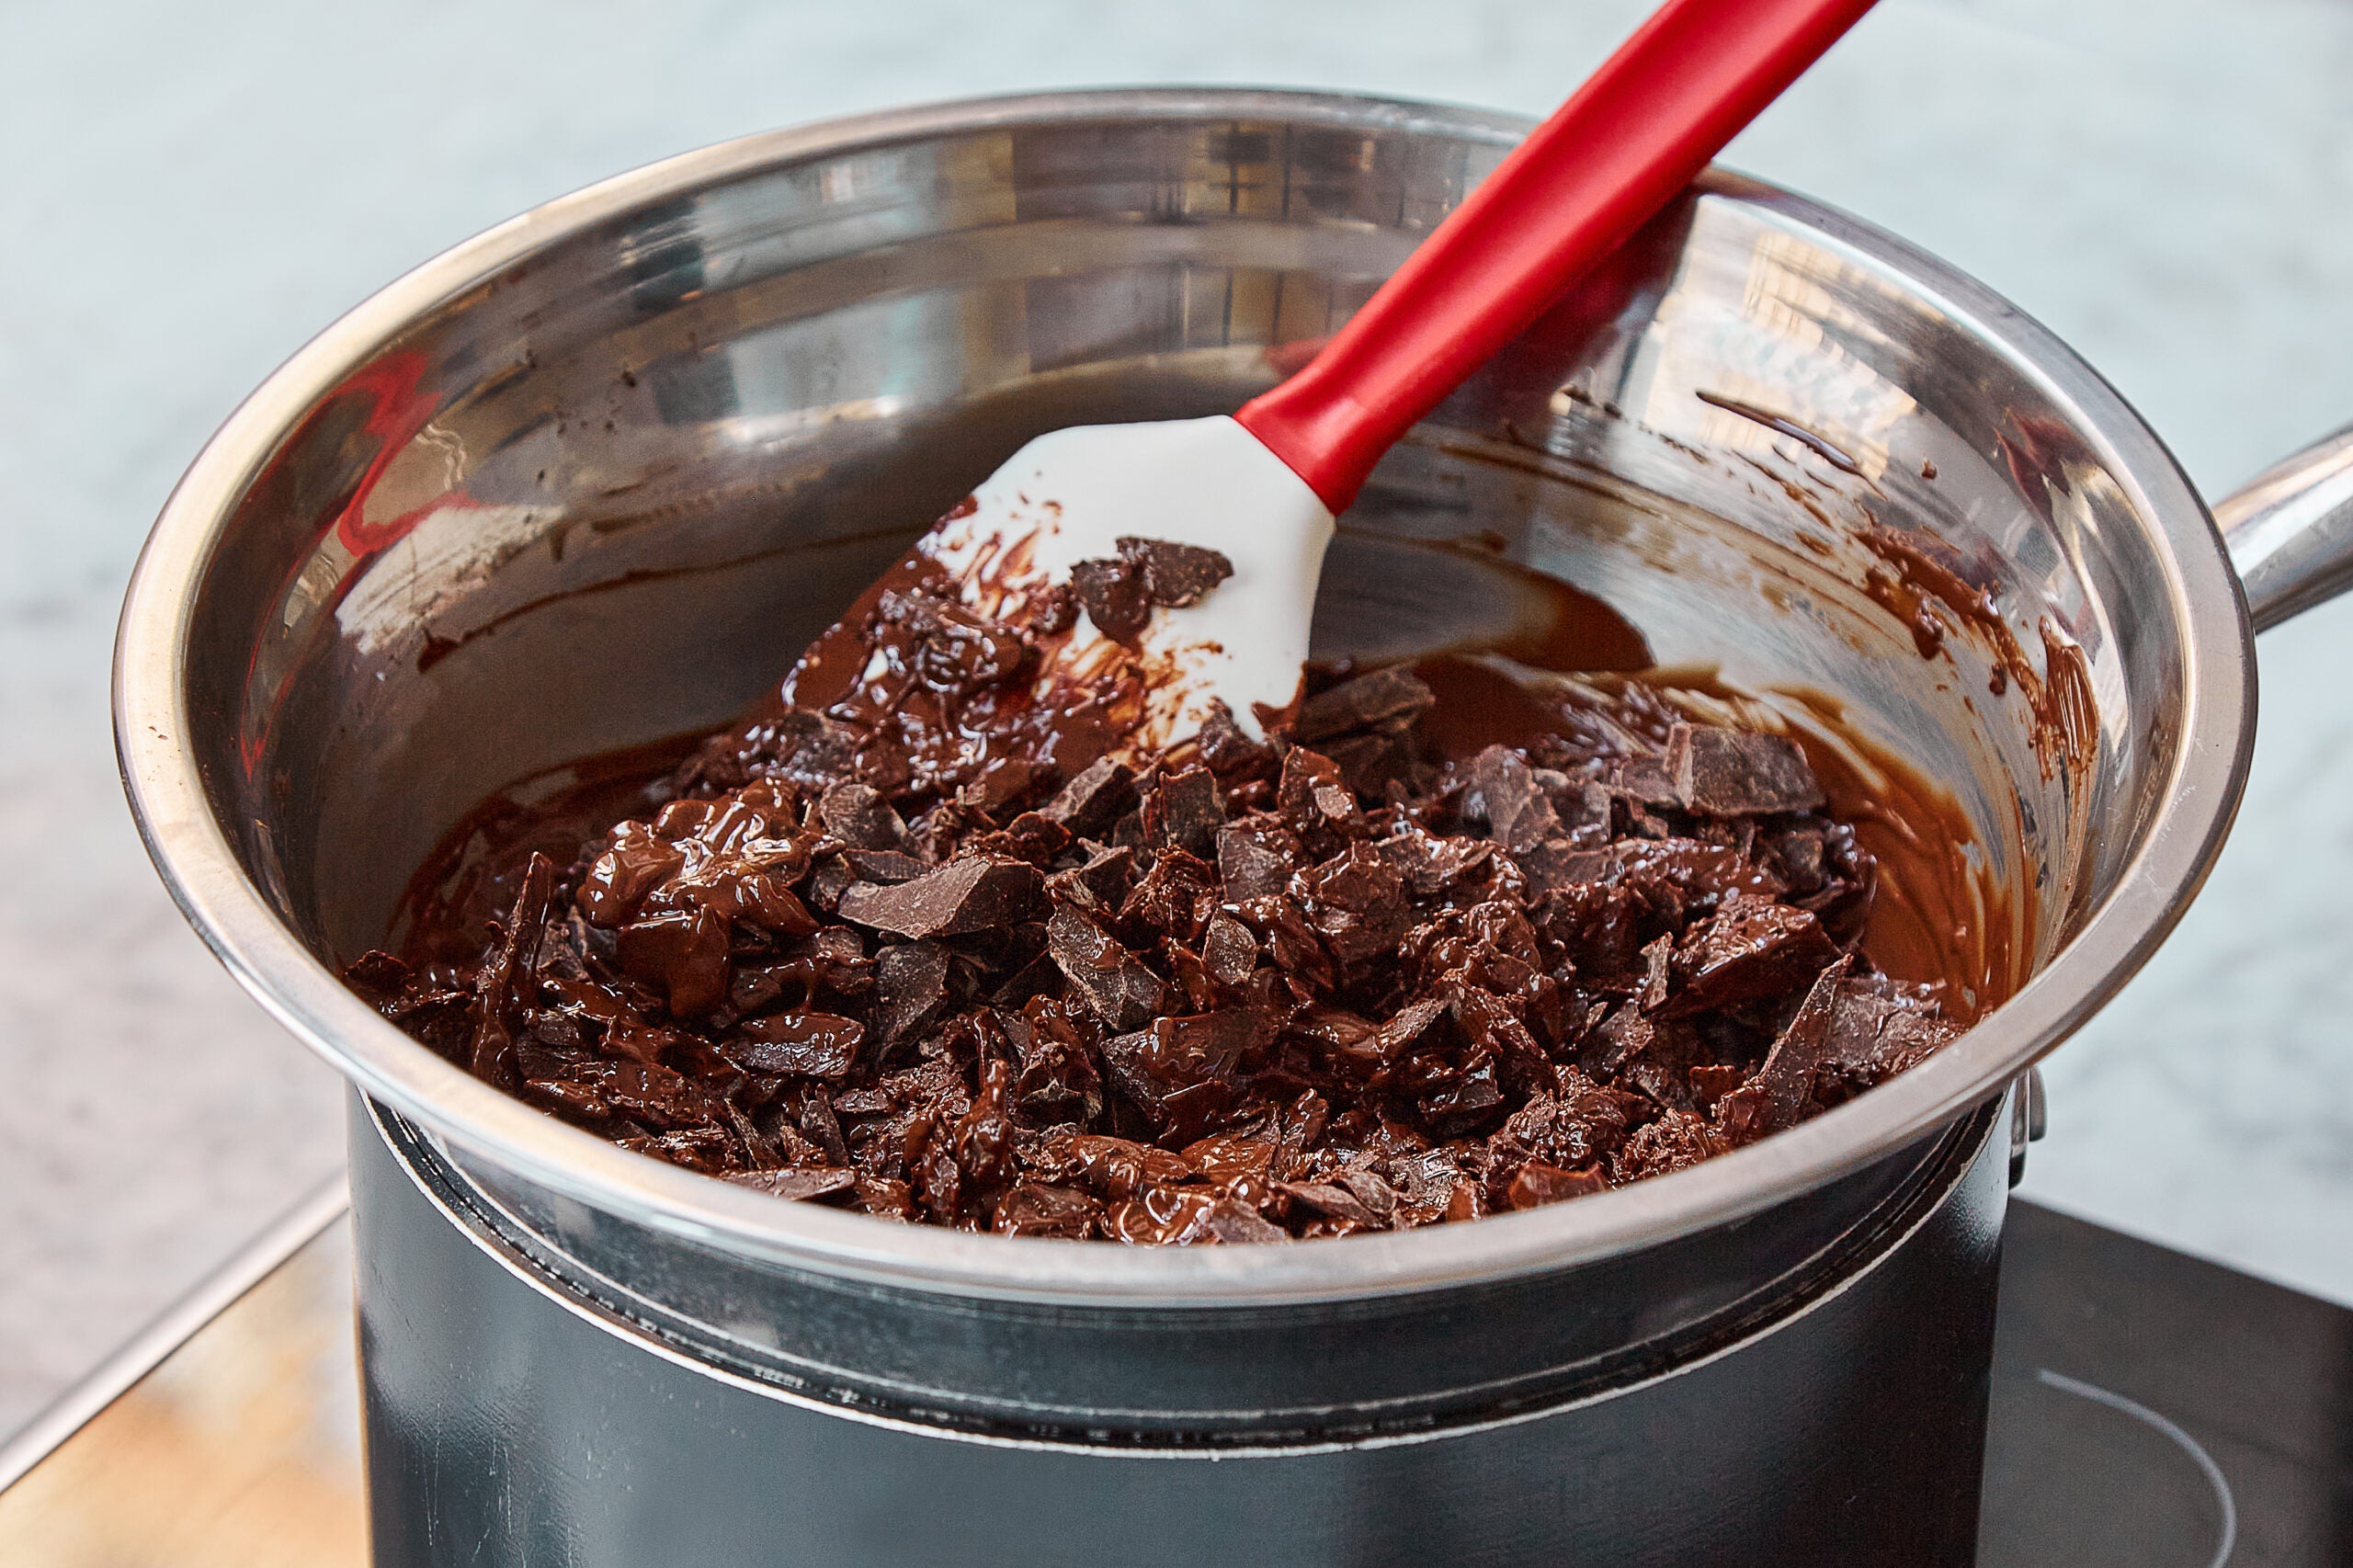 How To Temper Chocolate Without a Thermometer